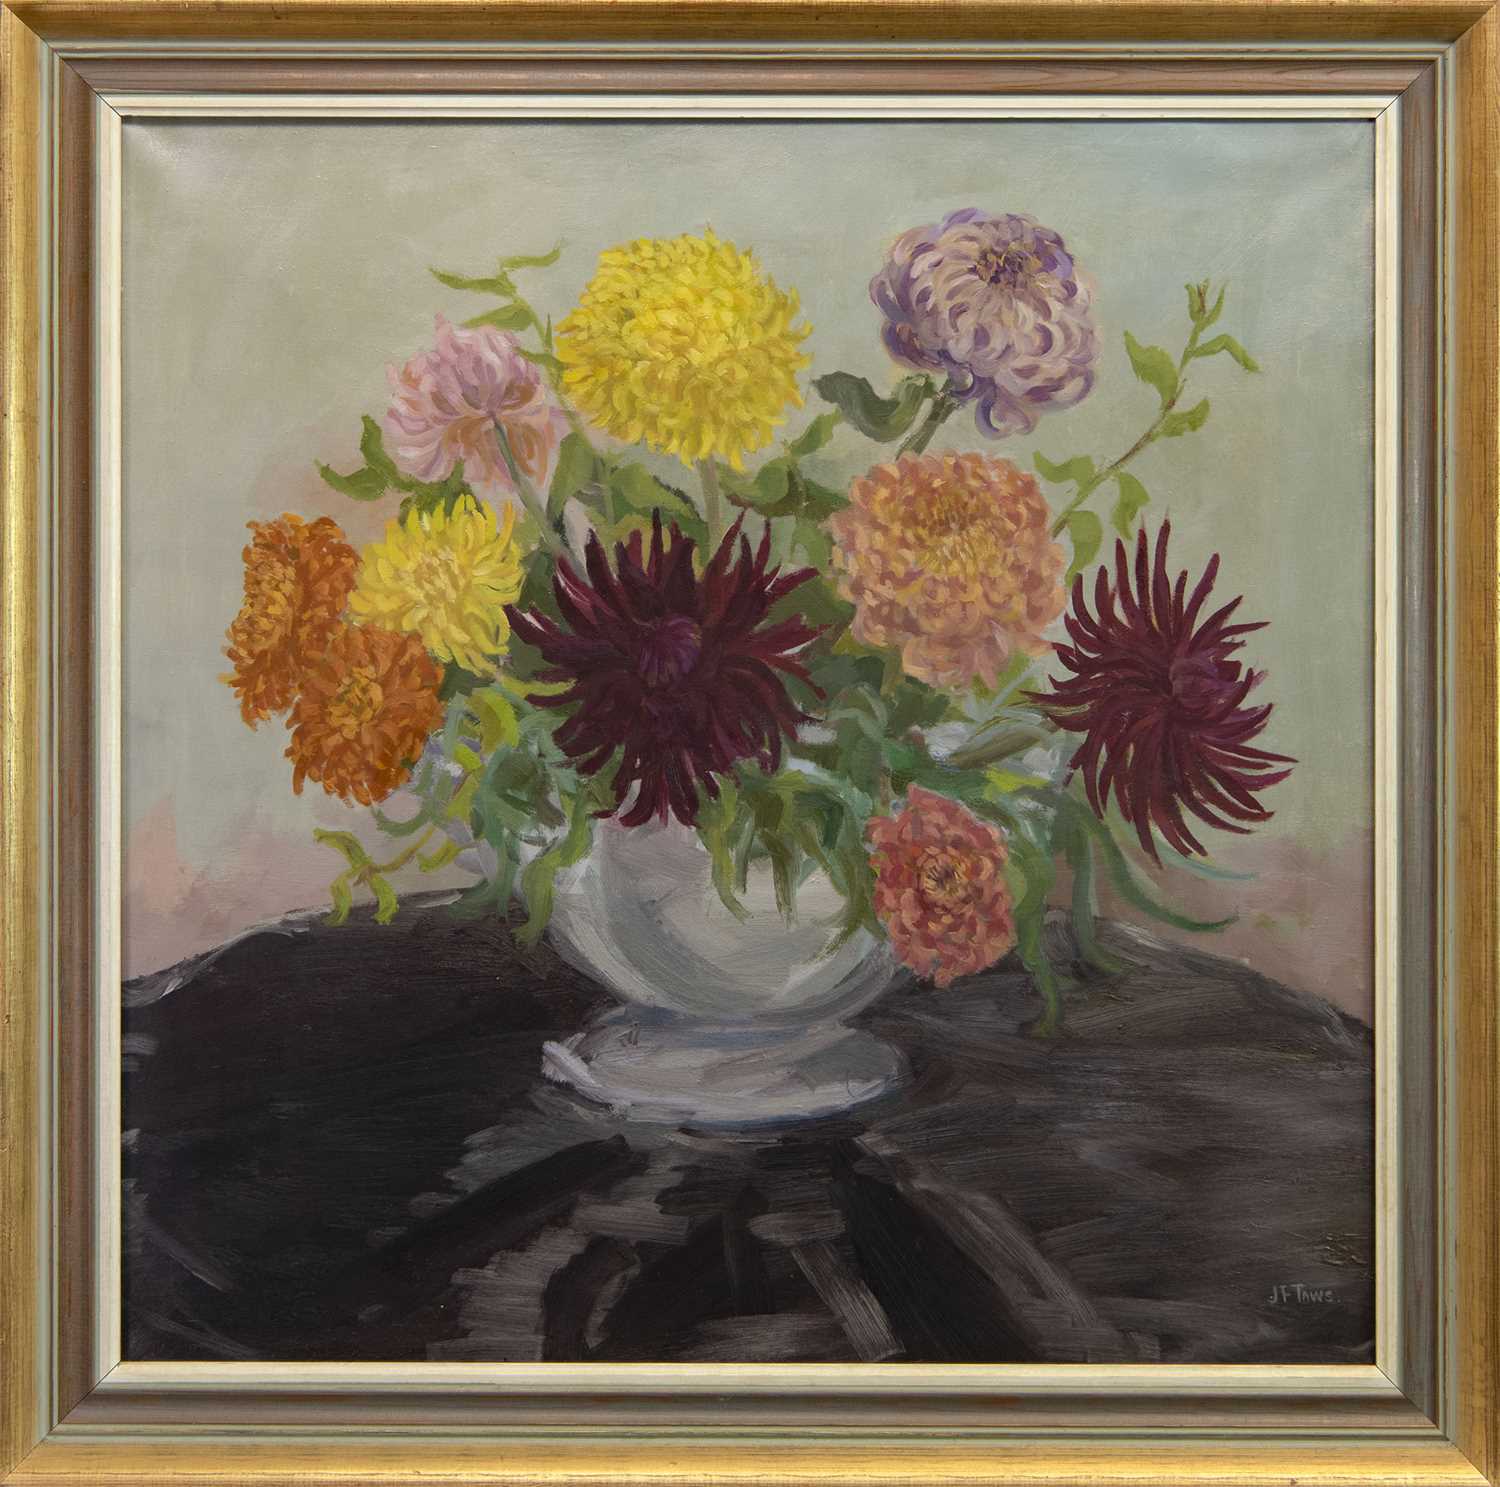 Lot 439 - CHRYSANTHEMUMS IN A VASE, AN OIL BY J F TAWS